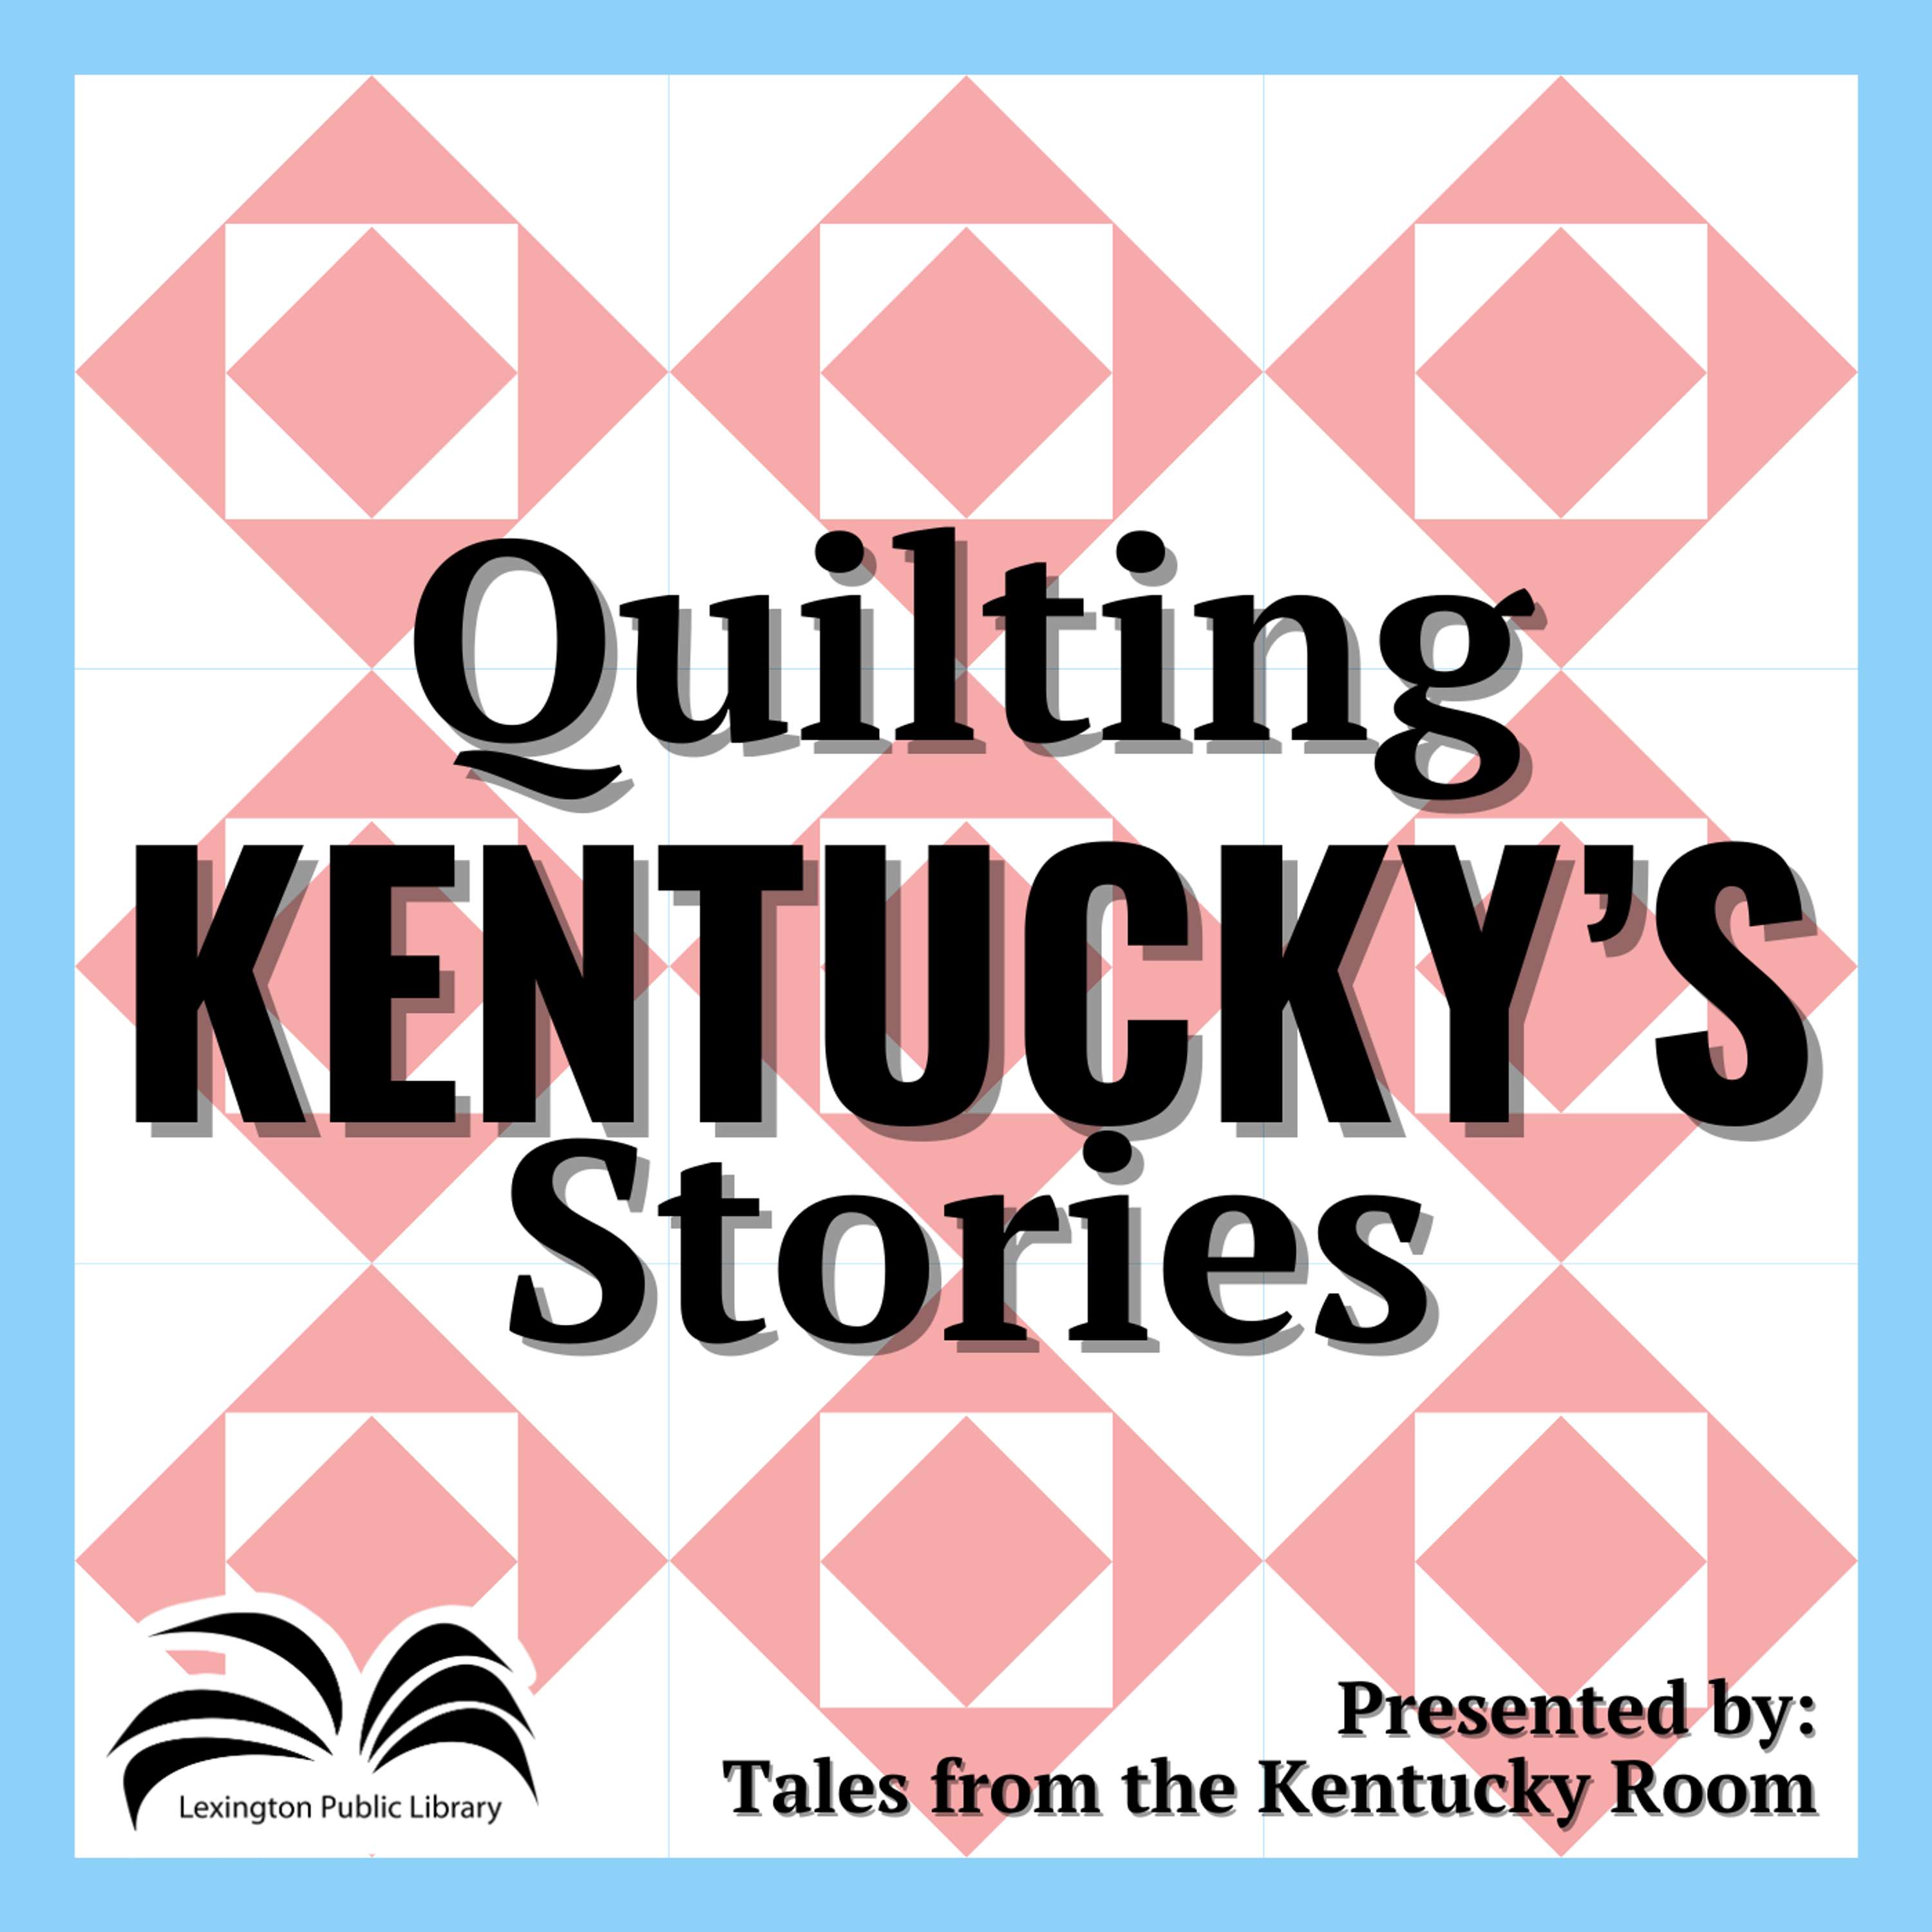 Quilting Kentucky's Stories: The Fairy Tree by Leo York